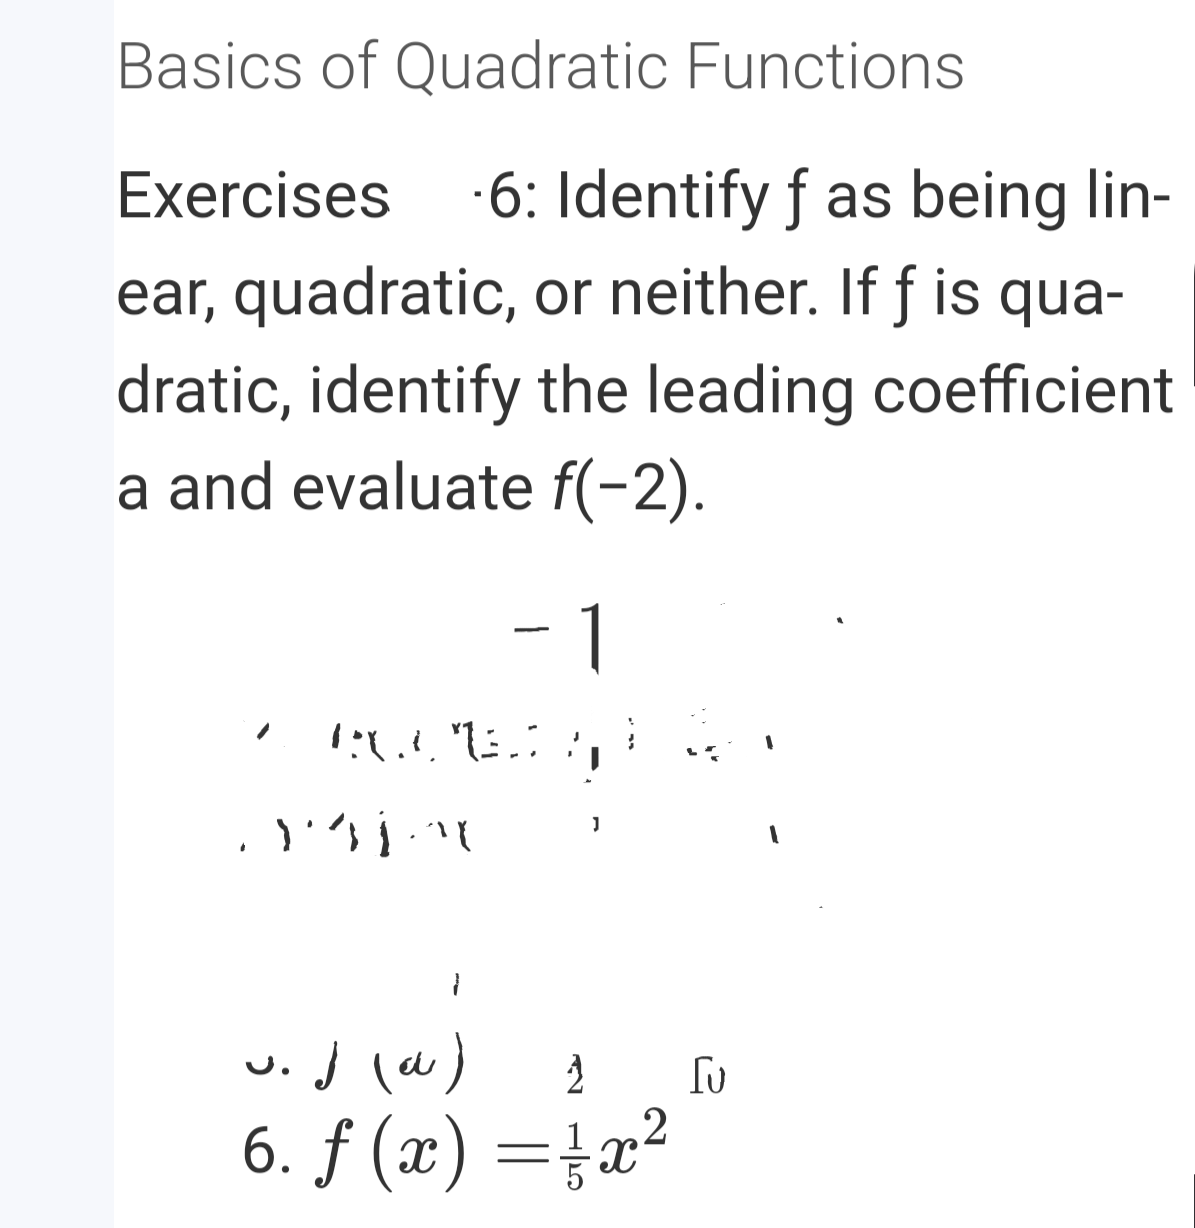 Basics of Quadratic Functions
·6: Identify f as being lin-
ear, quadratic, or neither. If f is qua-
Exercises
dratic, identify the leading coefficient
a and evaluate f(-2).
-1
w.j (w)
6. ƒ (x) =}a²
